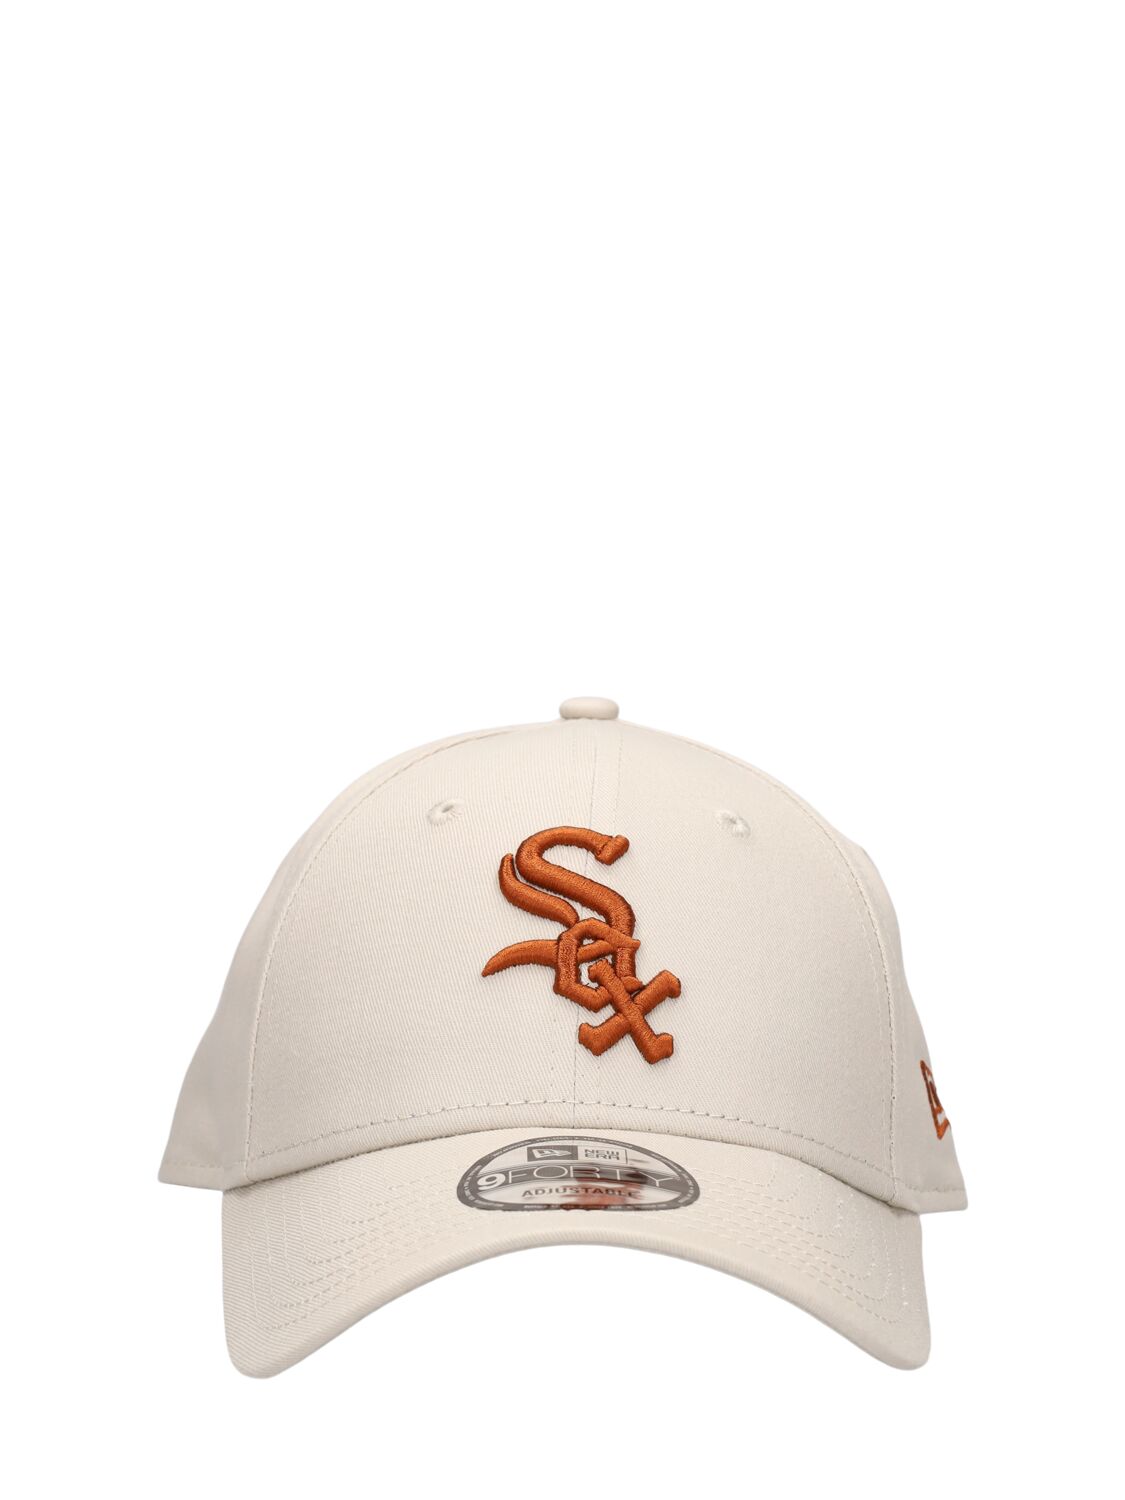 Image of Chicago White Sox 9forty Cotton Cap